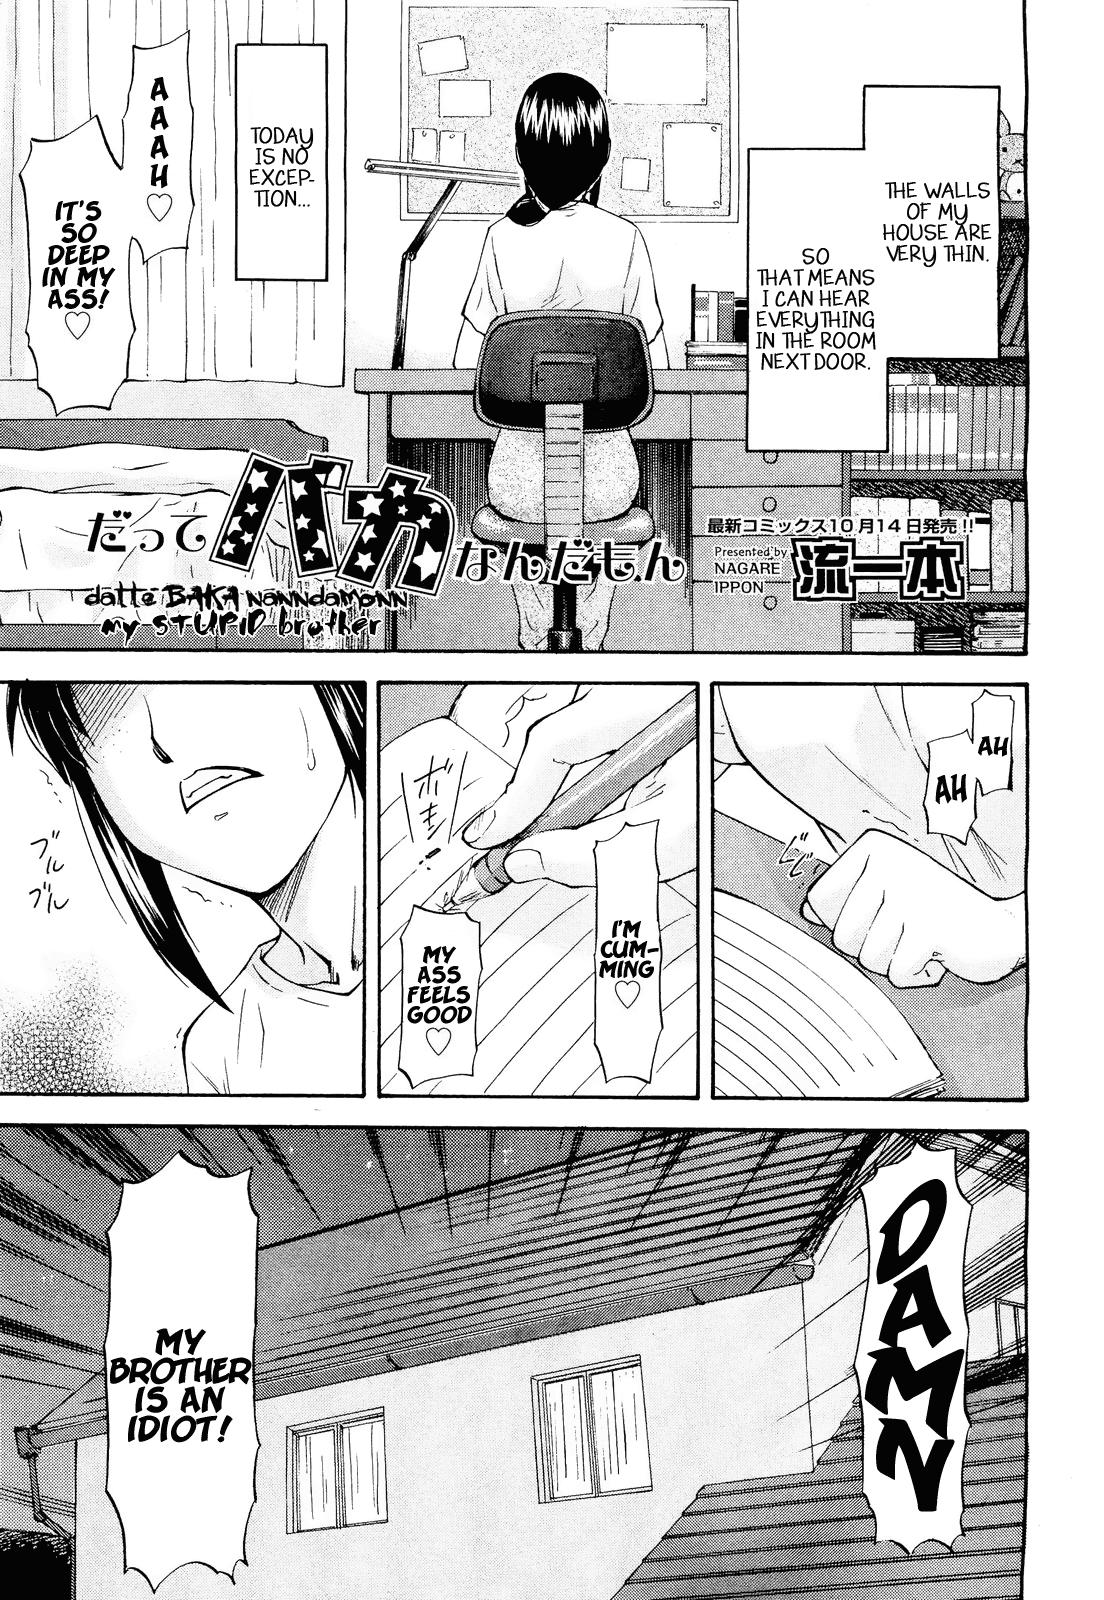 [Nagare Ippon] Meat Hole Ch.02-04,07-09 [English] 124